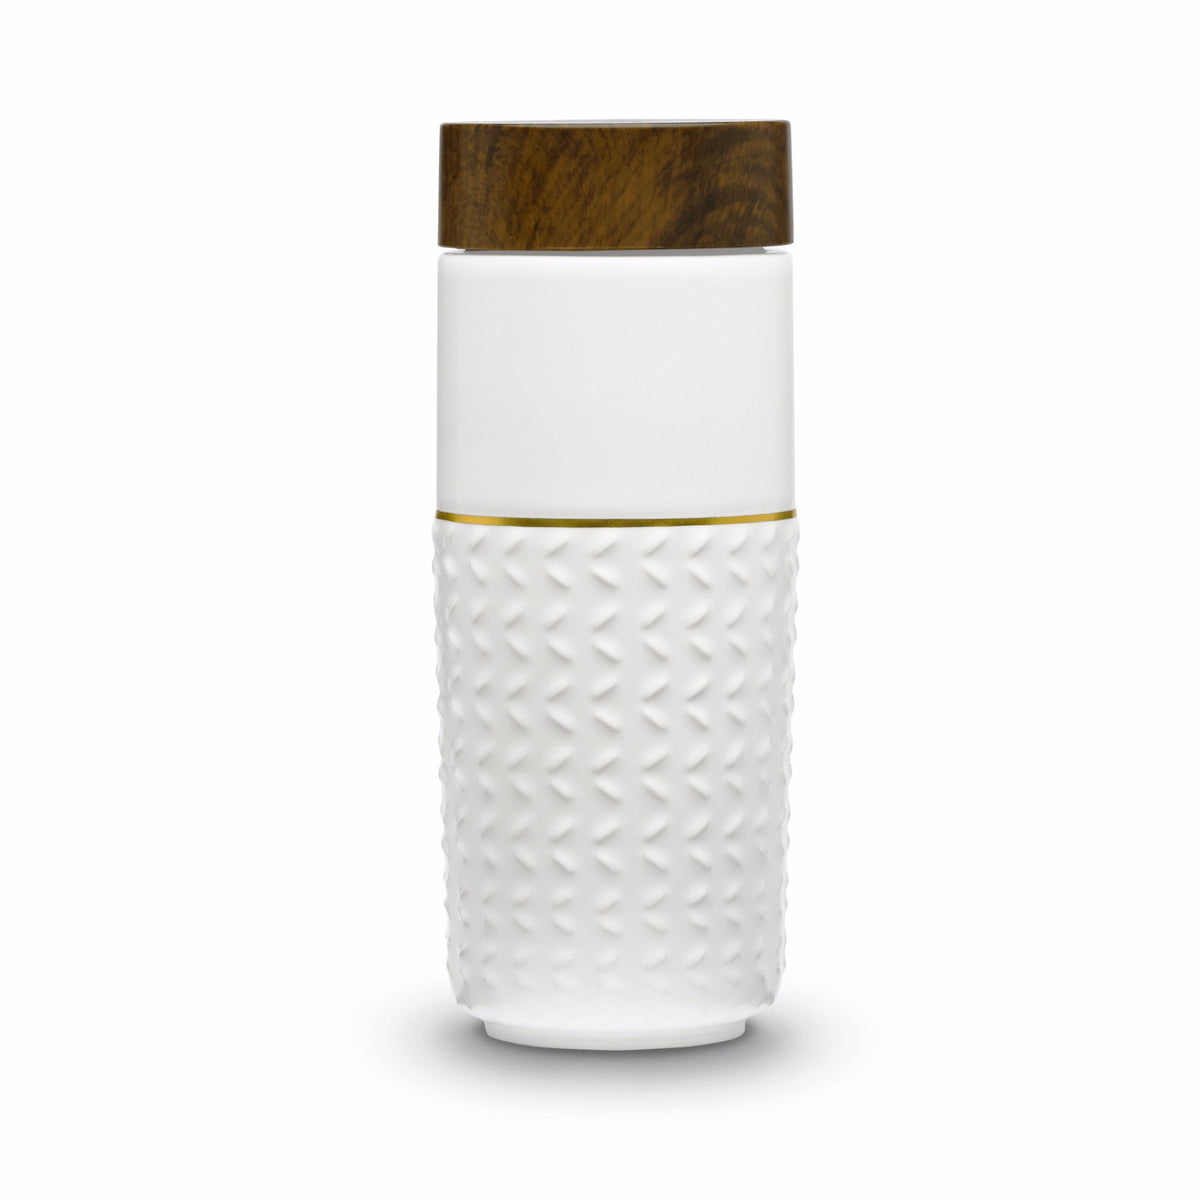 One-O-One / Free Soaring Gold Line Ceramic Tumbler by ACERA LIVEN